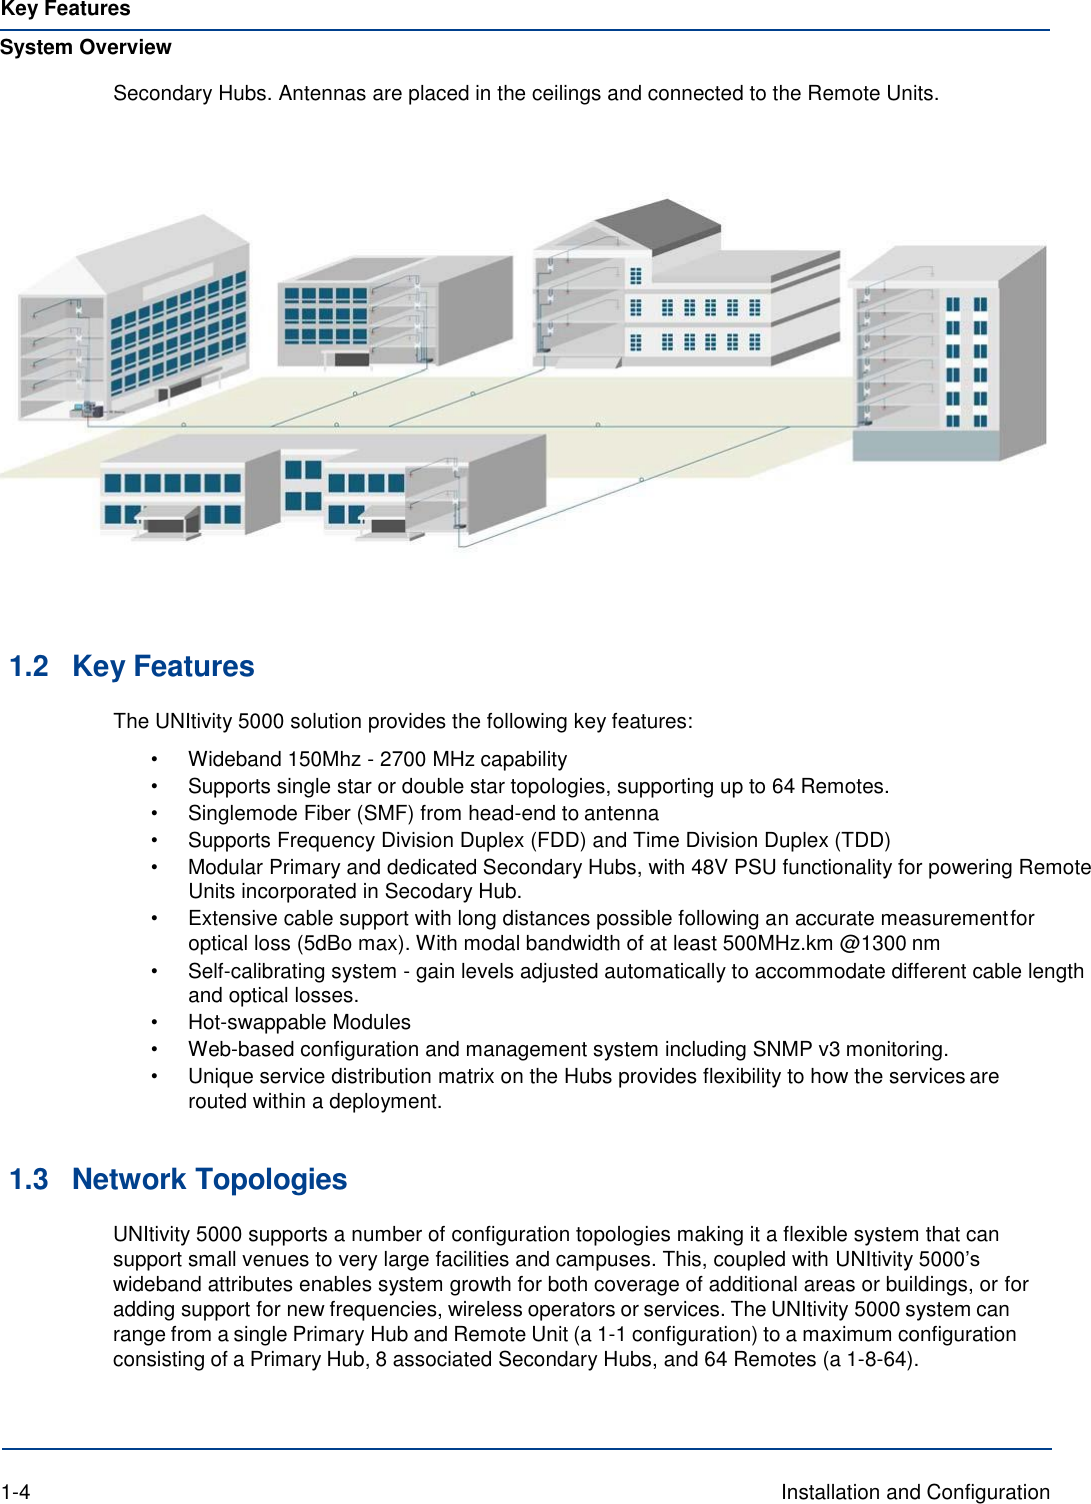 Key Features System Overview Secondary Hubs. Antennas are placed in the ceilings and connected to the Remote Units.       1.2 Key Features The UNItivity 5000 solution provides the following key features: • Wideband 150Mhz - 2700 MHz capability • Supports single star or double star topologies, supporting up to 64 Remotes. • Singlemode Fiber (SMF) from head-end to antenna • Supports Frequency Division Duplex (FDD) and Time Division Duplex (TDD) • Modular Primary and dedicated Secondary Hubs, with 48V PSU functionality for powering Remote Units incorporated in Secodary Hub. • Extensive cable support with long distances possible following an accurate measurement for optical loss (5dBo max). With modal bandwidth of at least 500MHz.km @1300 nm • Self-calibrating system - gain levels adjusted automatically to accommodate different cable length and optical losses. • Hot-swappable Modules • Web-based configuration and management system including SNMP v3 monitoring. • Unique service distribution matrix on the Hubs provides flexibility to how the services are routed within a deployment.   1.3 Network Topologies UNItivity 5000 supports a number of configuration topologies making it a flexible system that can support small venues to very large facilities and campuses. This, coupled with UNItivity 5000’s wideband attributes enables system growth for both coverage of additional areas or buildings, or for adding support for new frequencies, wireless operators or services. The UNItivity 5000 system can range from a single Primary Hub and Remote Unit (a 1-1 configuration) to a maximum configuration consisting of a Primary Hub, 8 associated Secondary Hubs, and 64 Remotes (a 1-8-64).     1-4  Installation and Configuration 